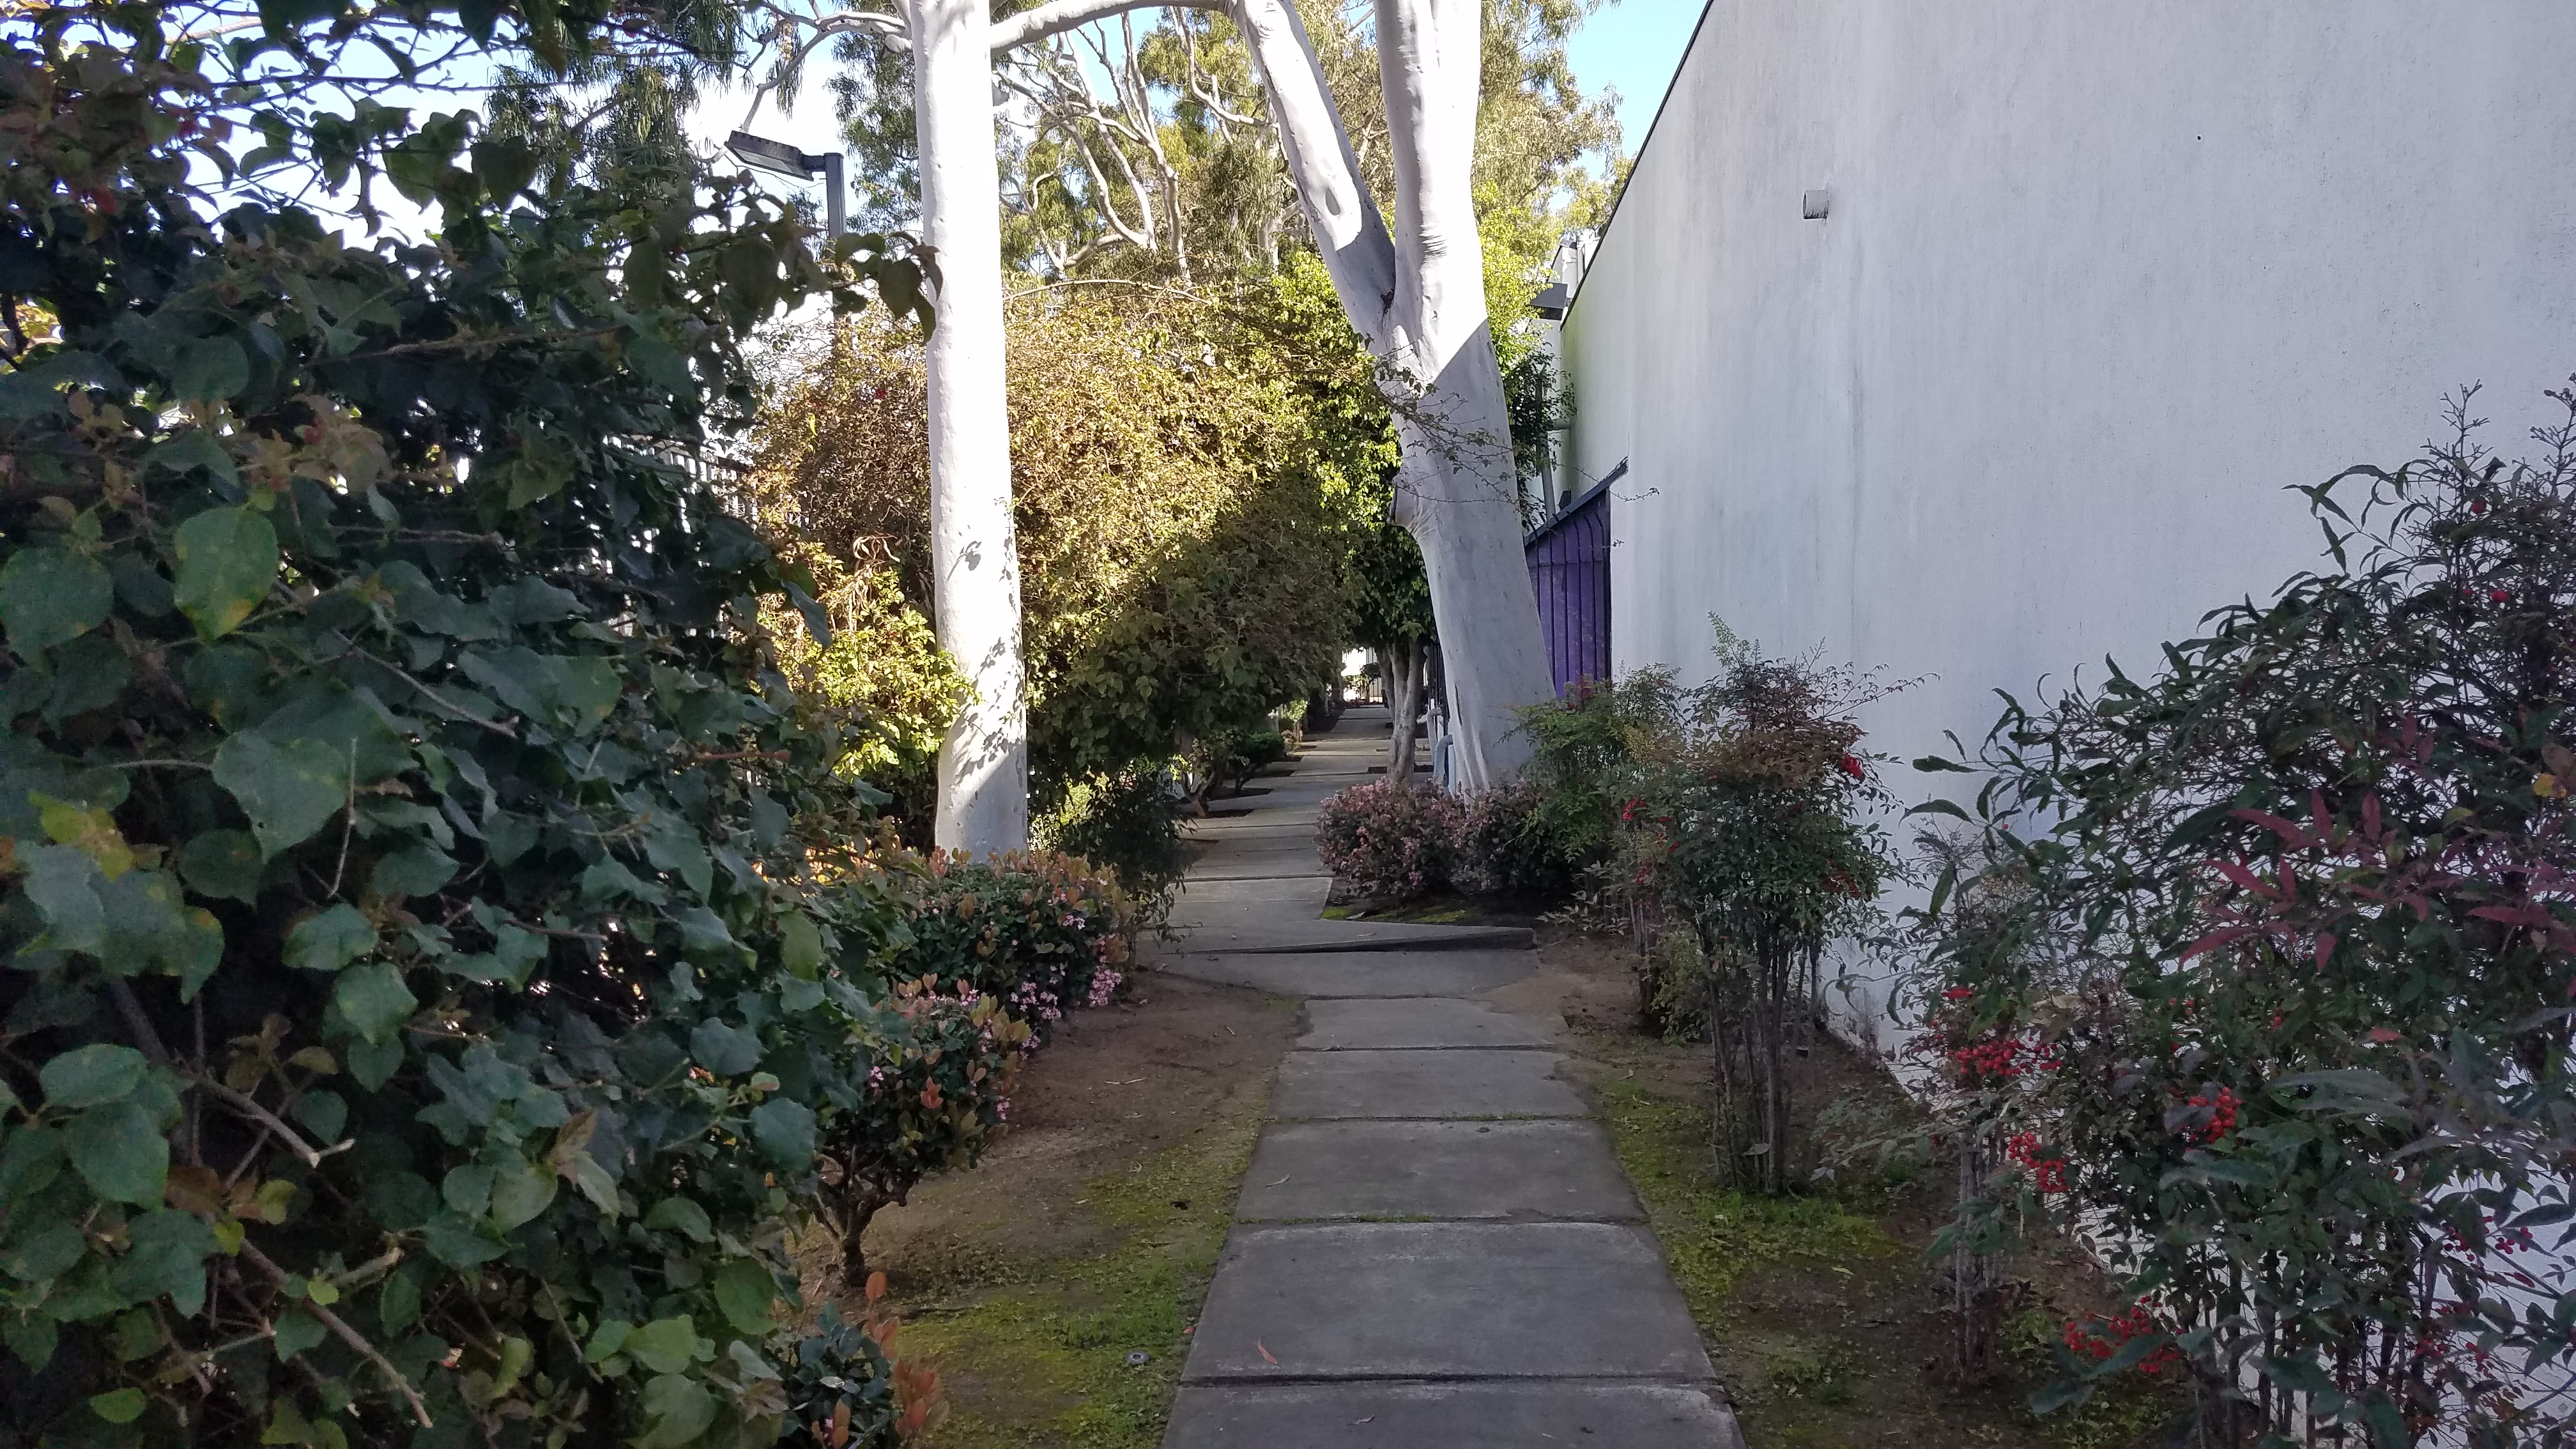 A walkway between two buildings with trees in the background.